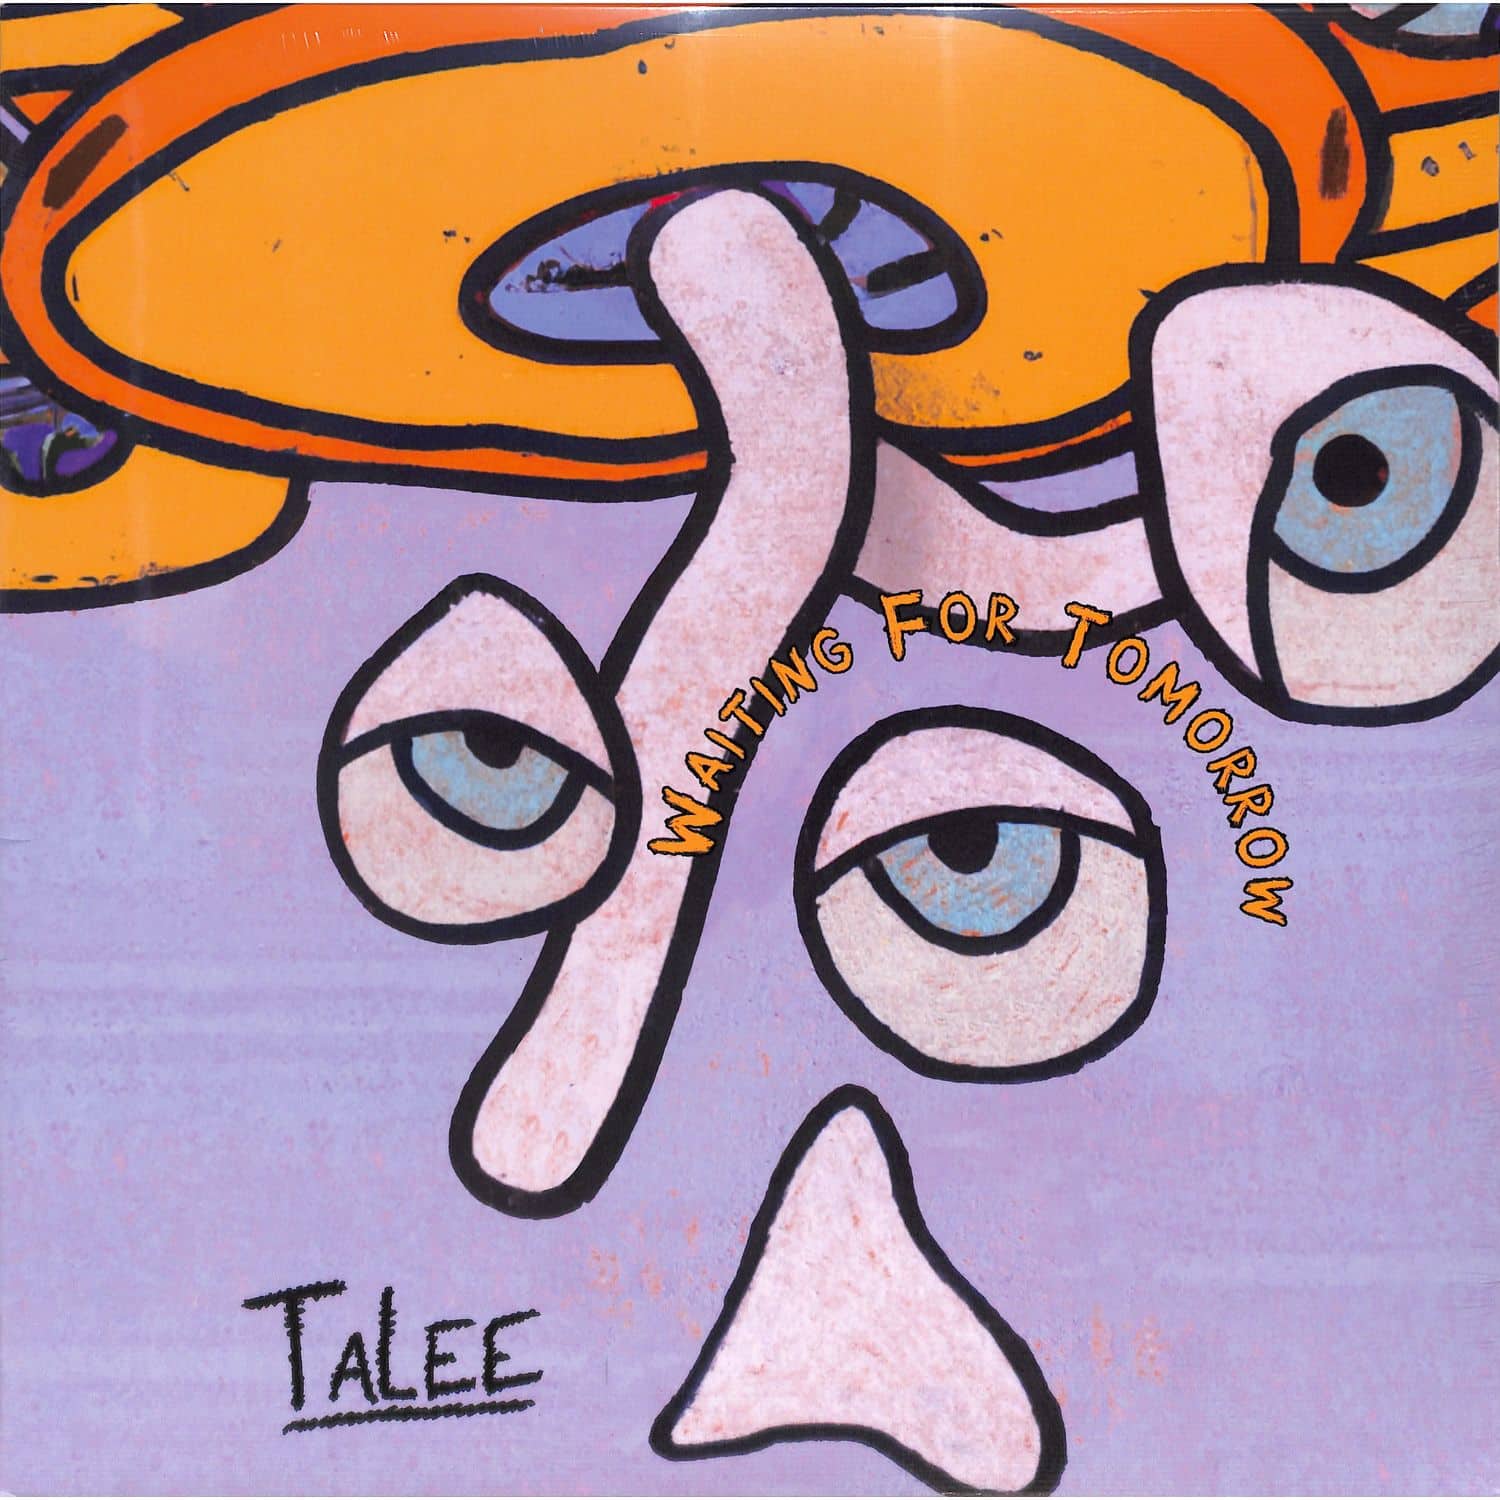 Talee - WAITING FOR TOMORROW EP